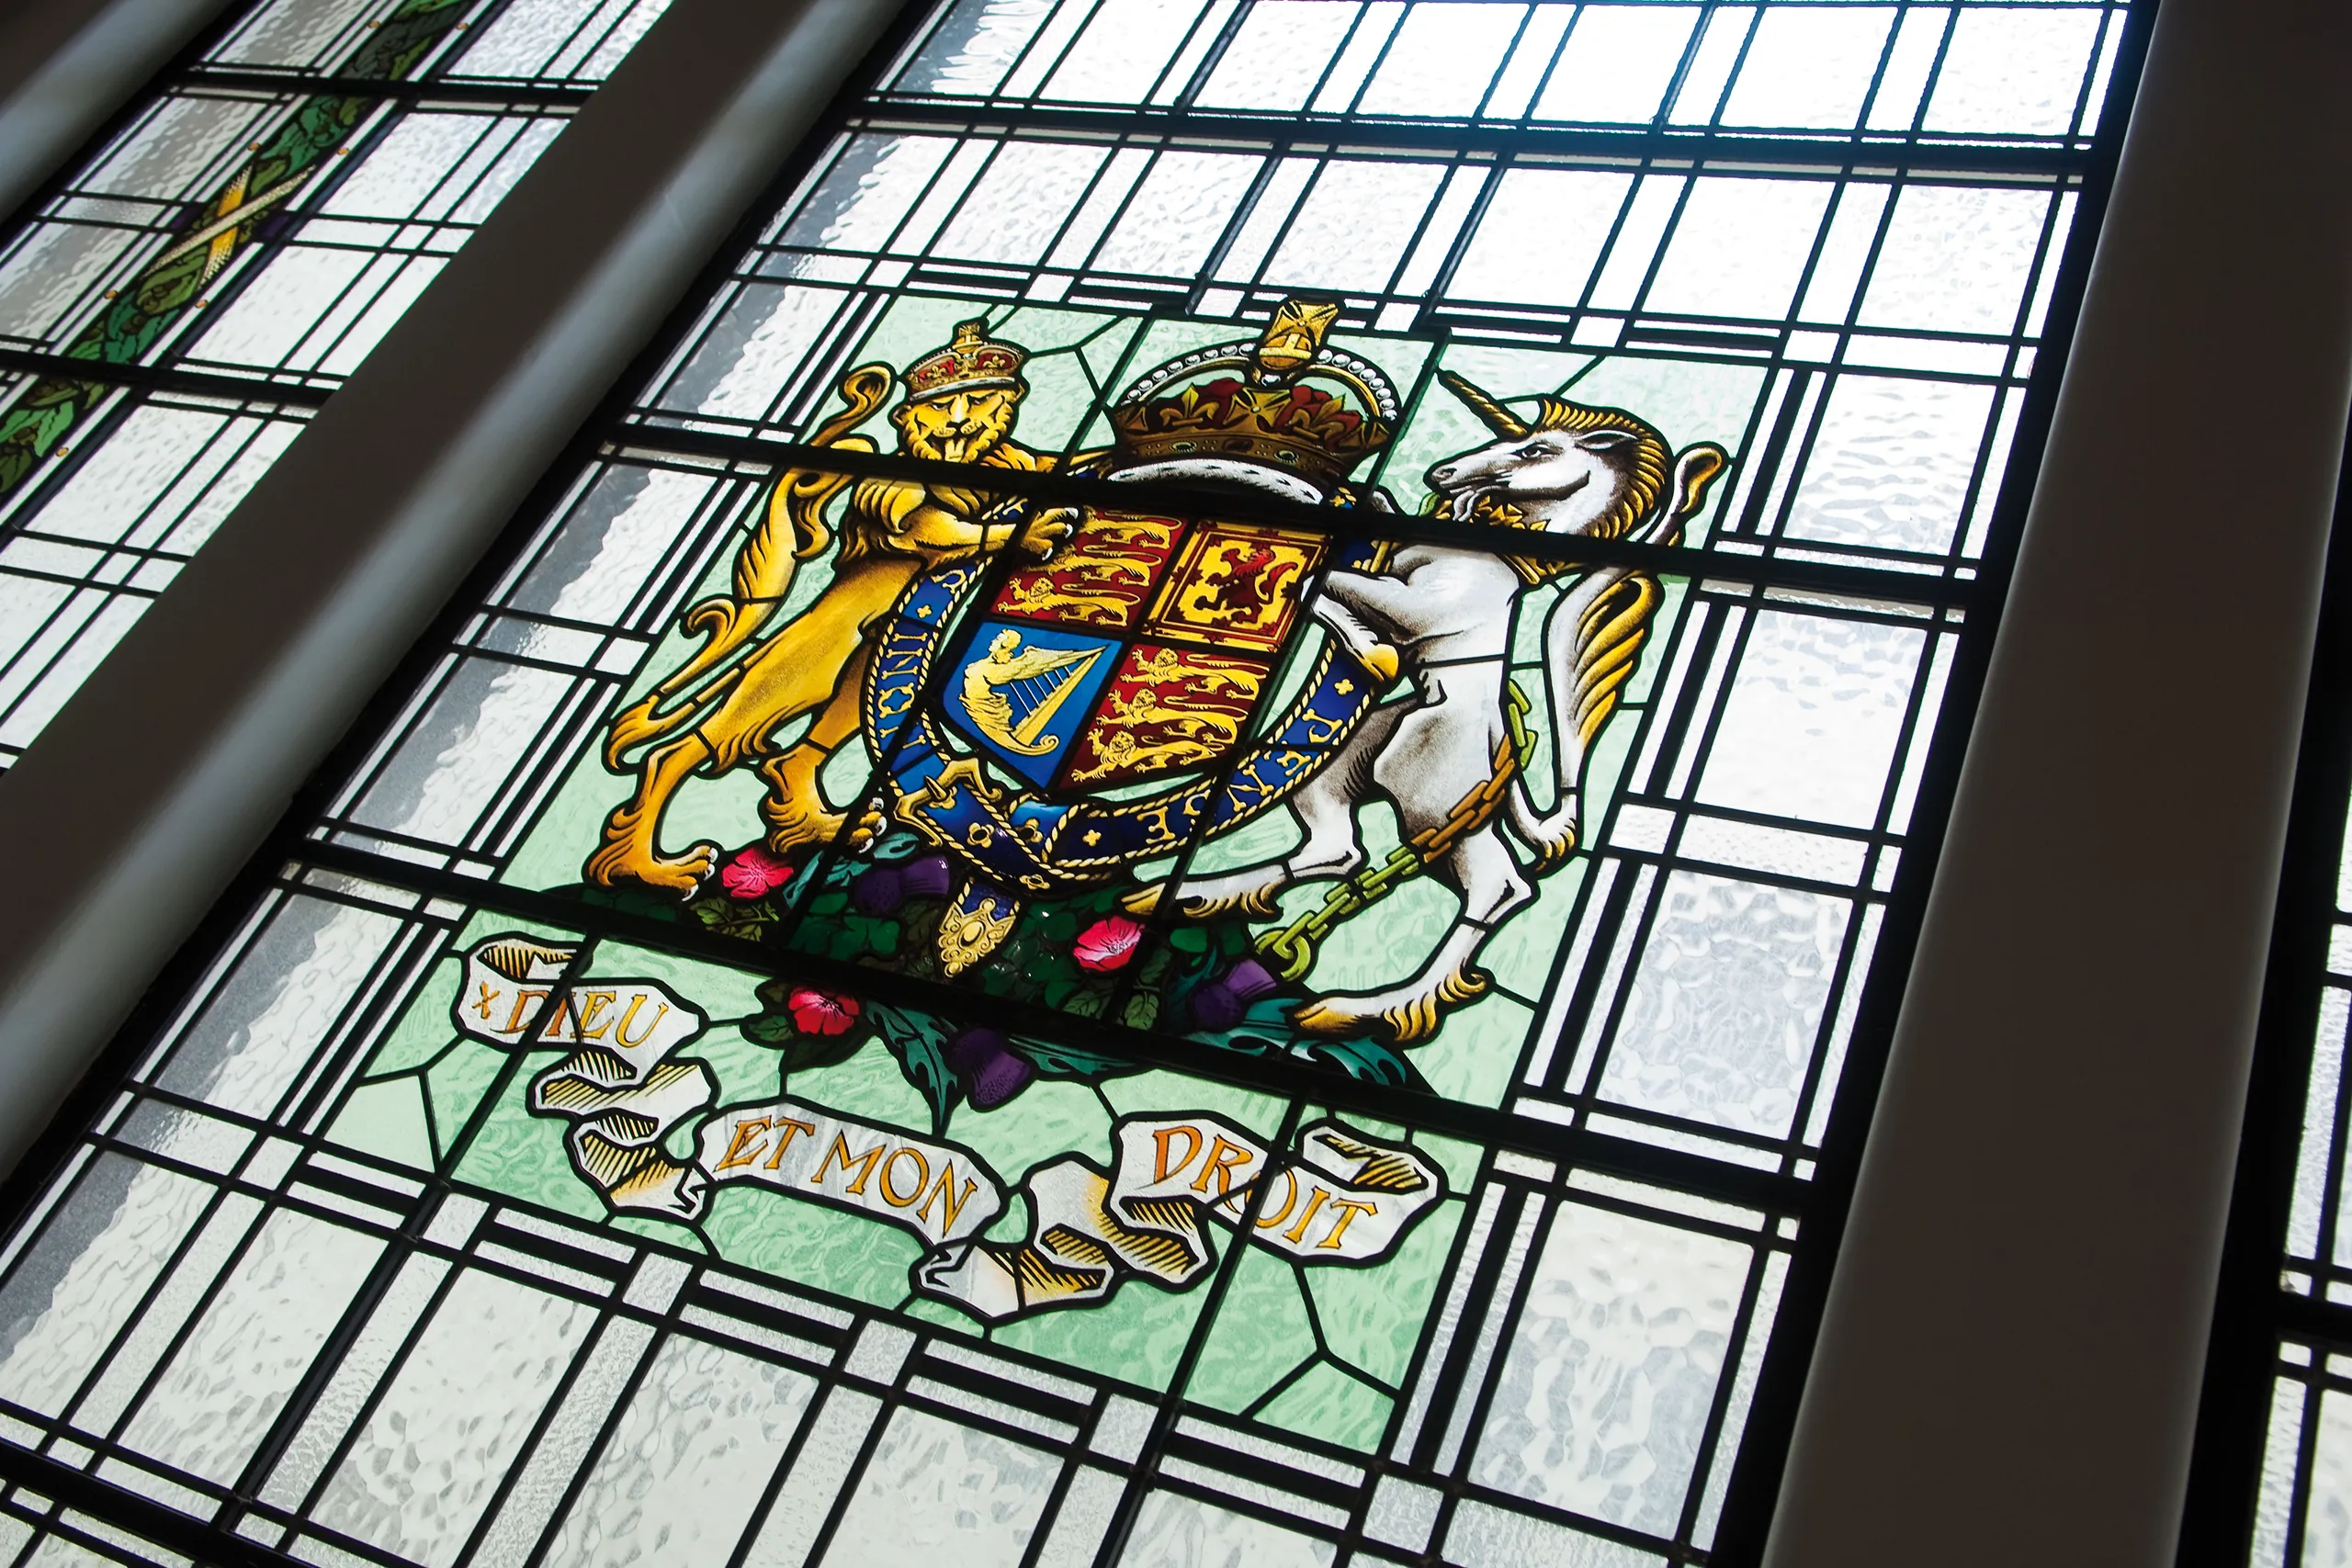 The Port of Liverpool Building, stained glass window